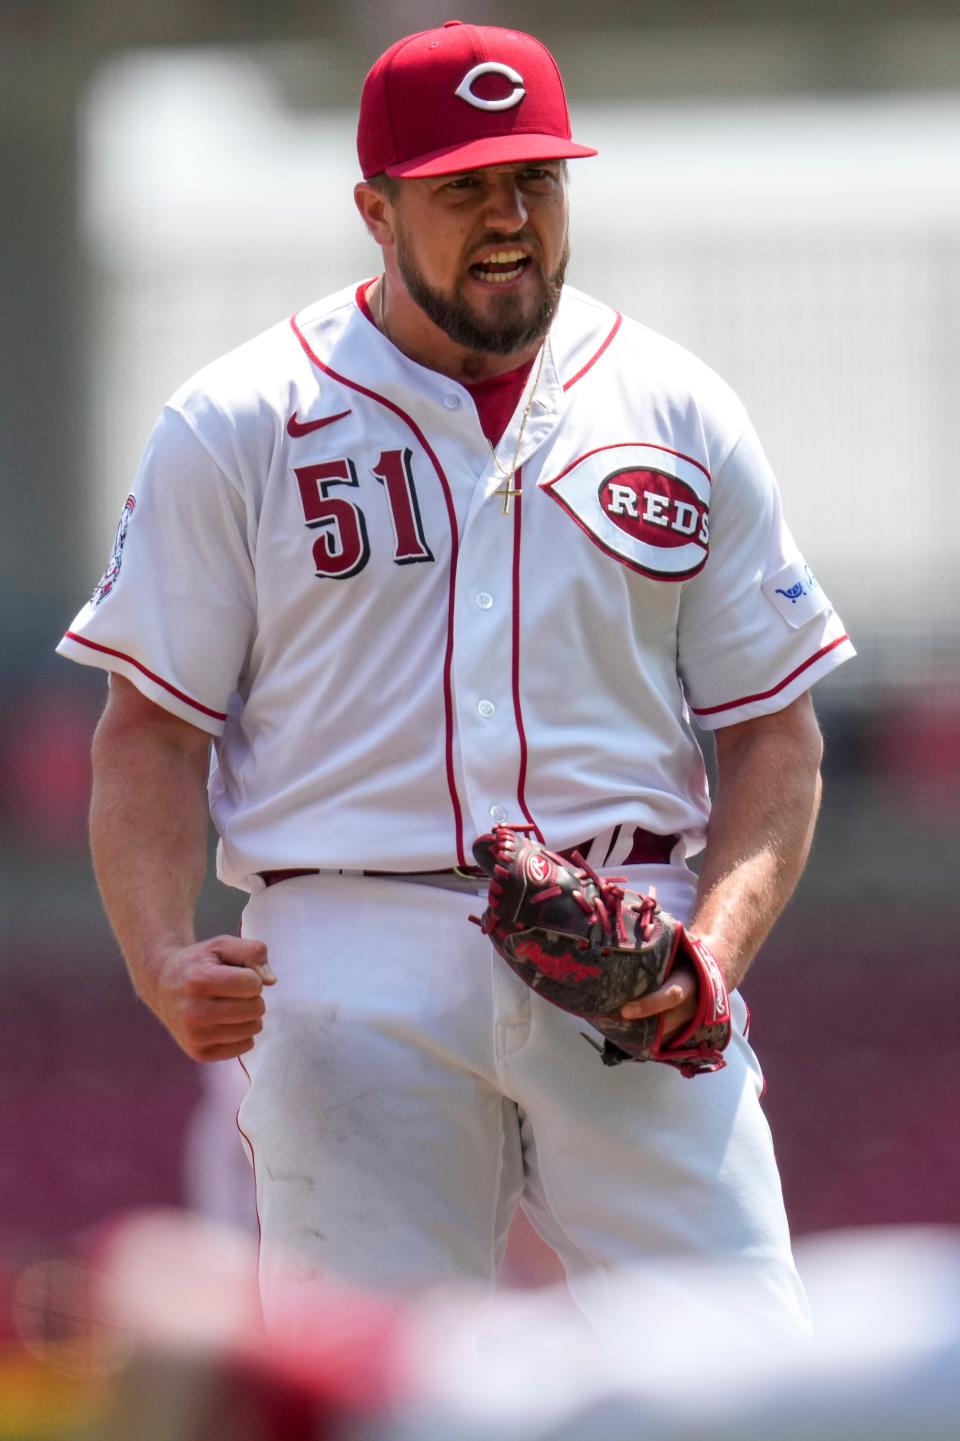 Cincinnati Reds starting pitcher Graham Ashcraft celebrates after getting out of a jam against the Texas Rangers.